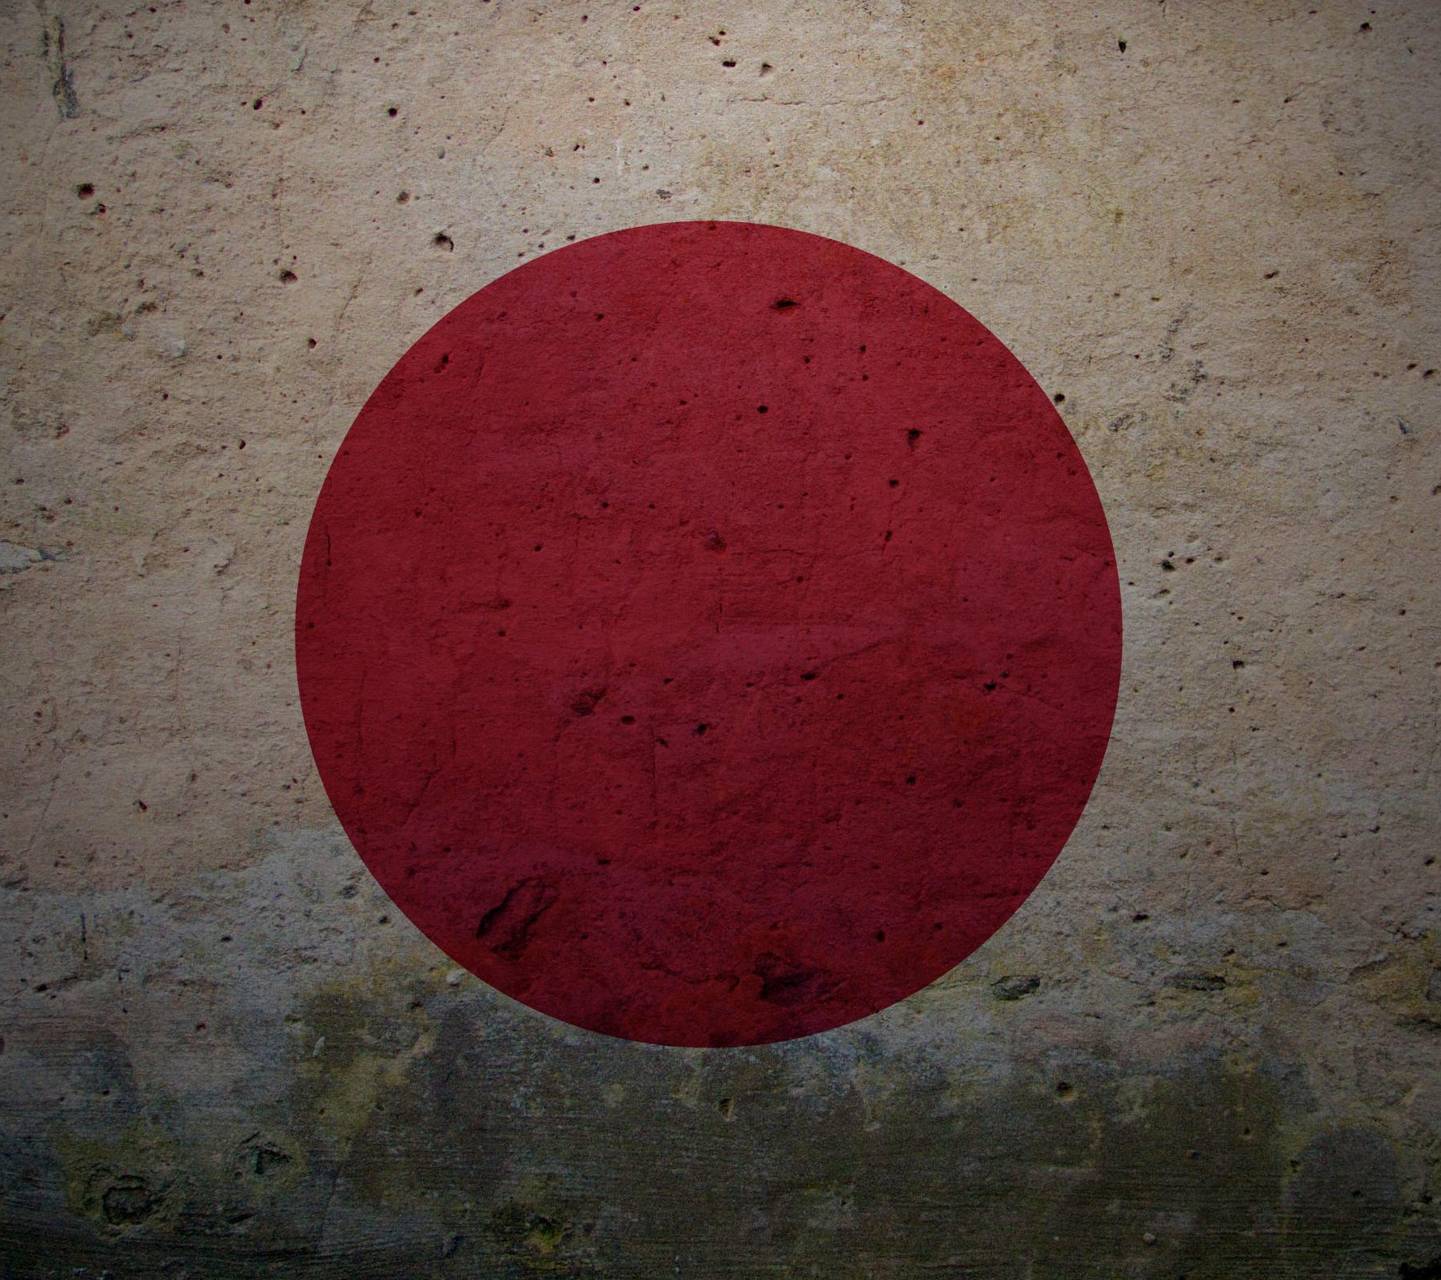 Cool Japanese Flag Wallpapers